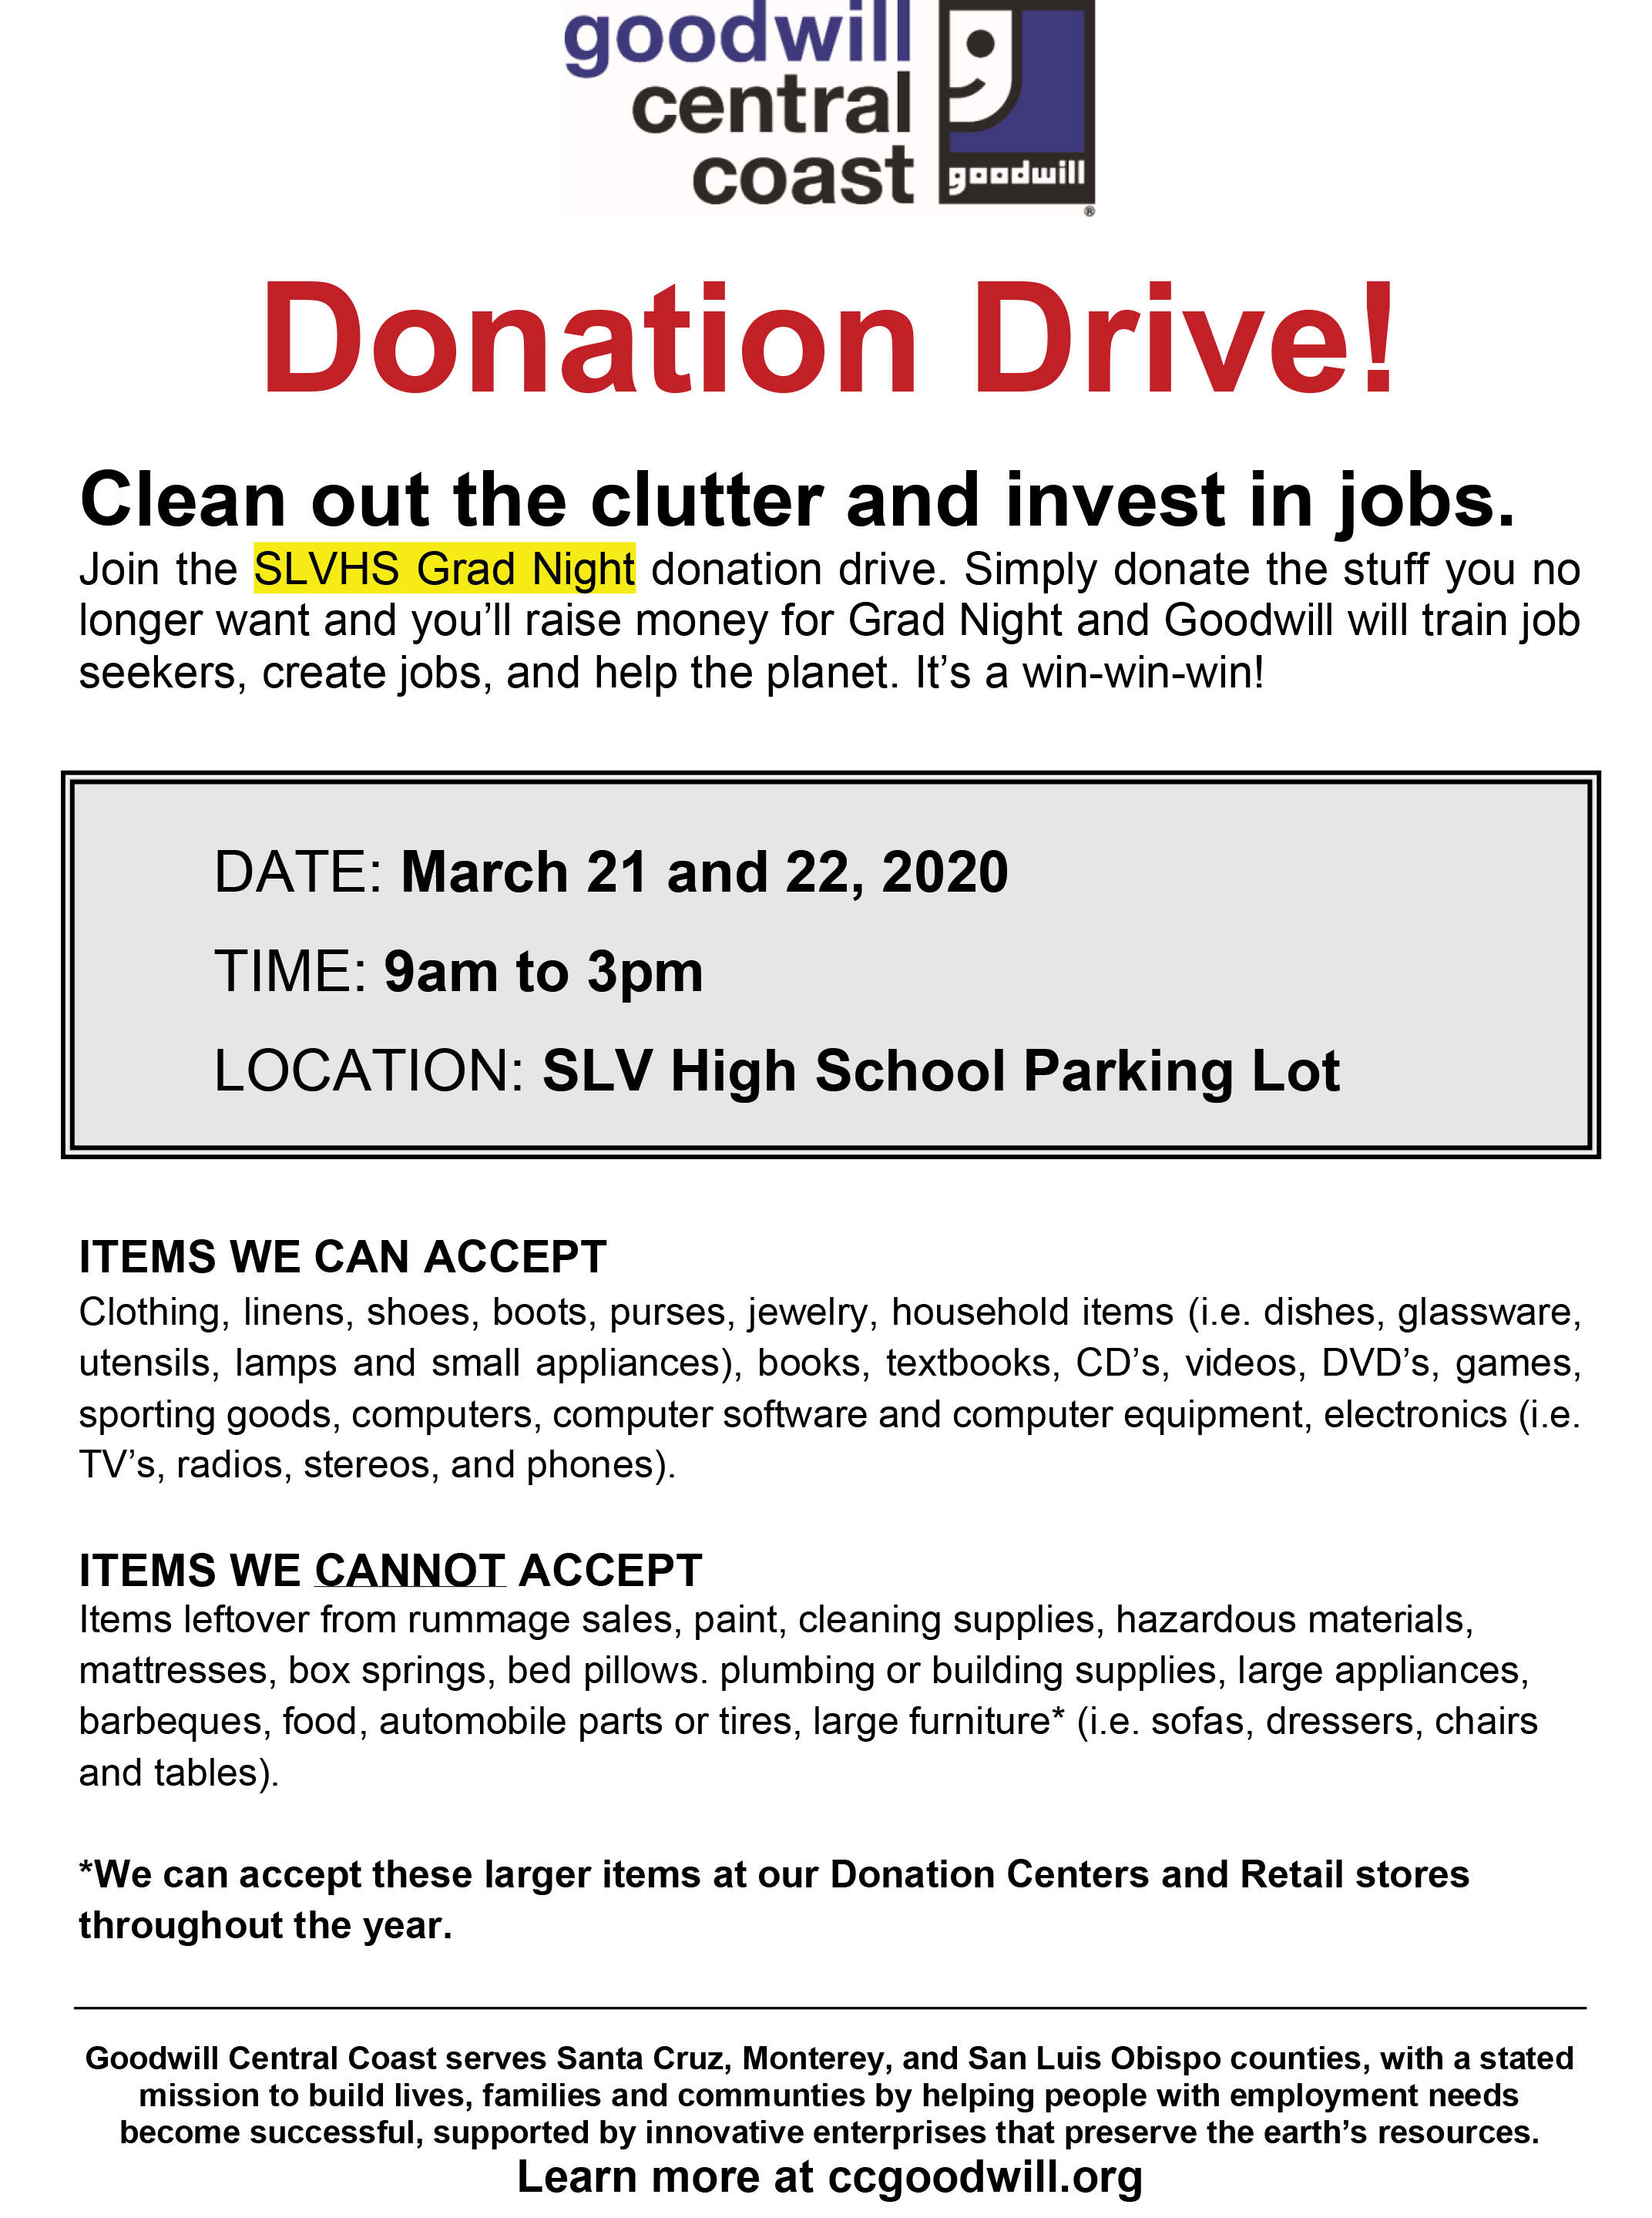 Goodwill donation drive: 3/21-22 9am-3pm SLVHS parking lot